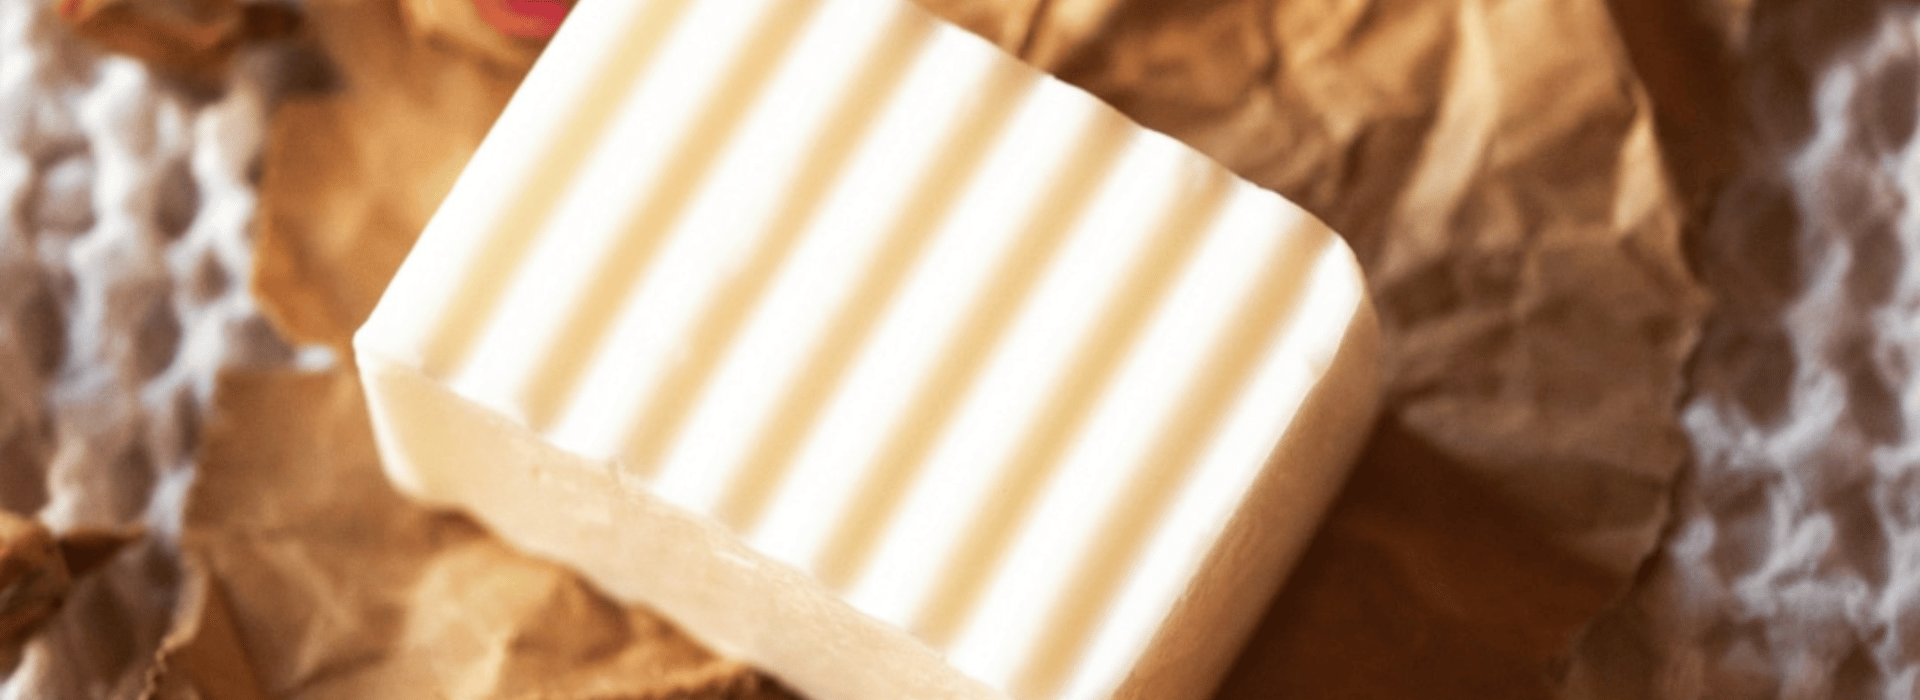 Close up of unwrapped white Crown Chakra Soap on natural background | Natural skincare – what’s the big deal? | Shine Body & Bath Chakra Soap | Blog